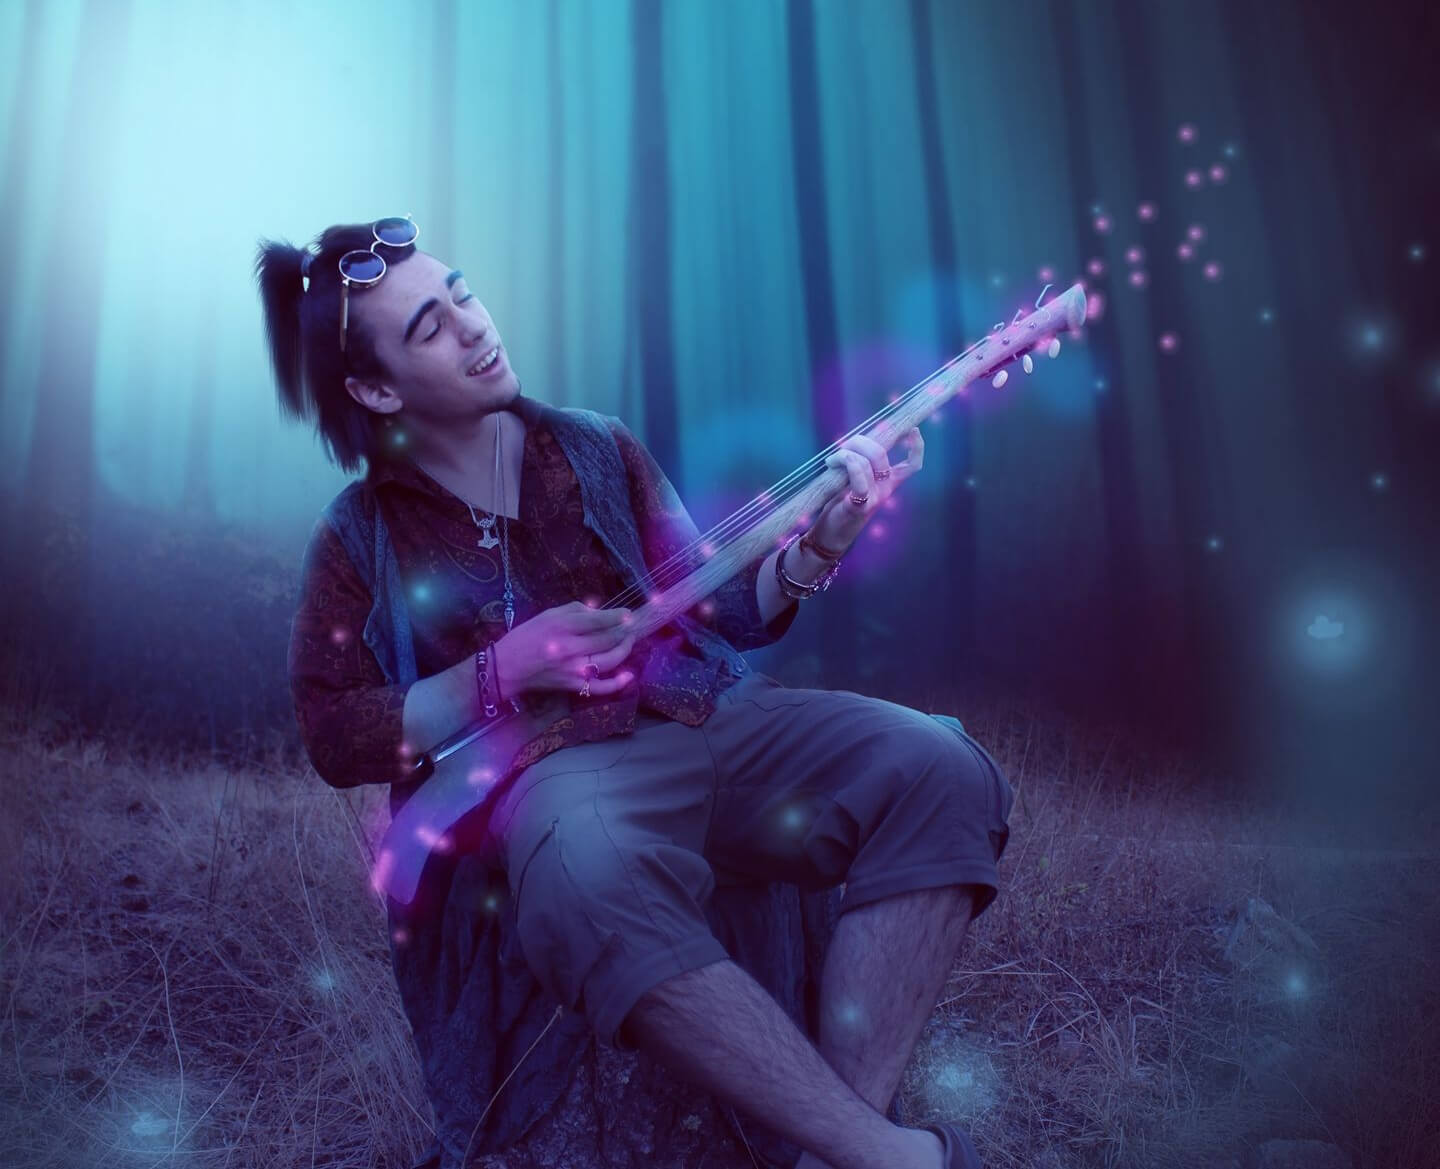 man plays guitar in enchanted forest